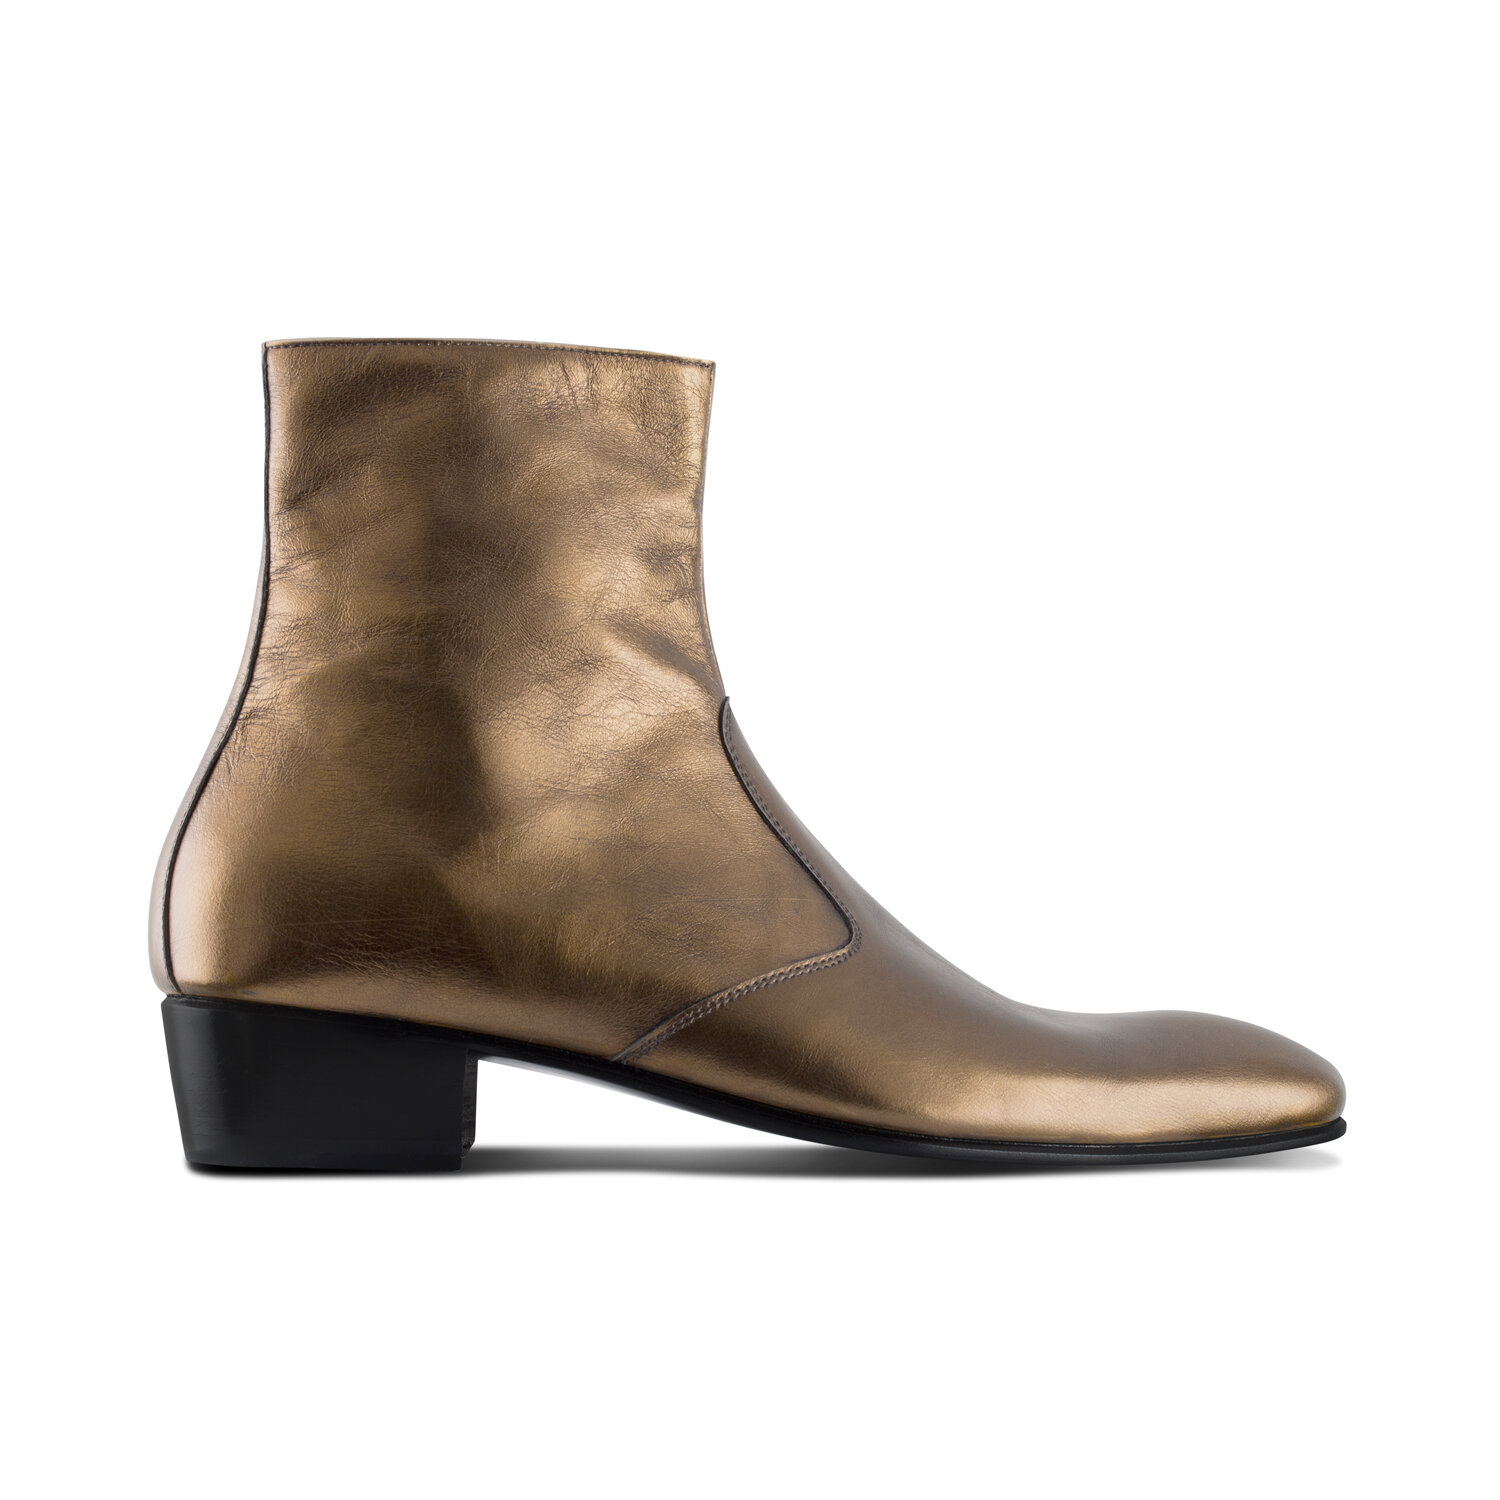 Are metallic gold leather boots really a things this season?